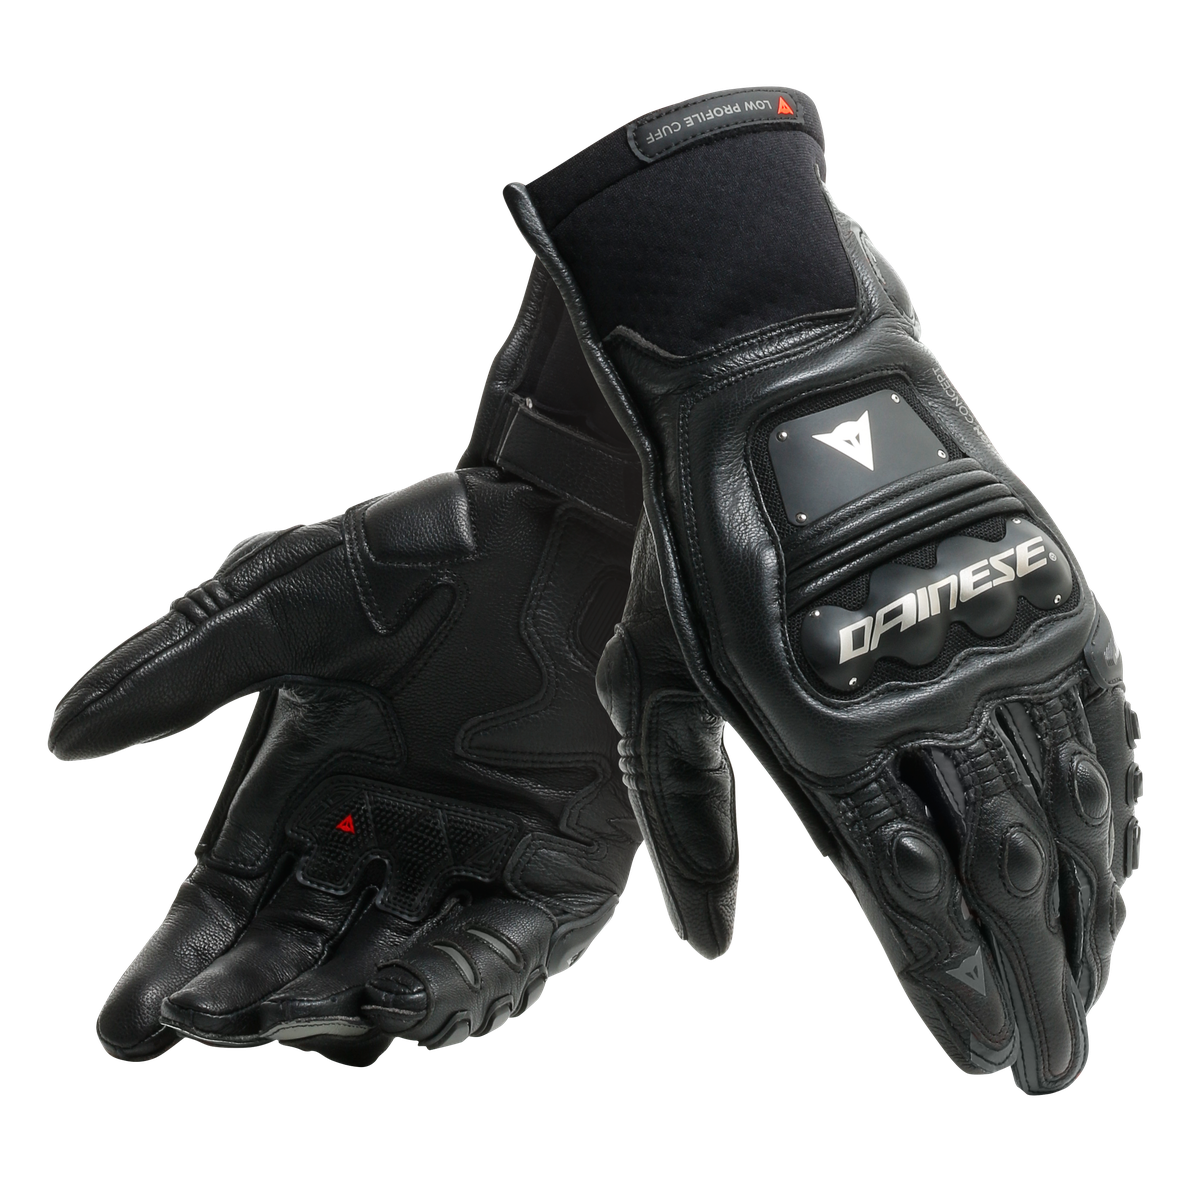 Viewing Images For Dainese Steel-Pro In Gloves :: MotorcycleGear.com